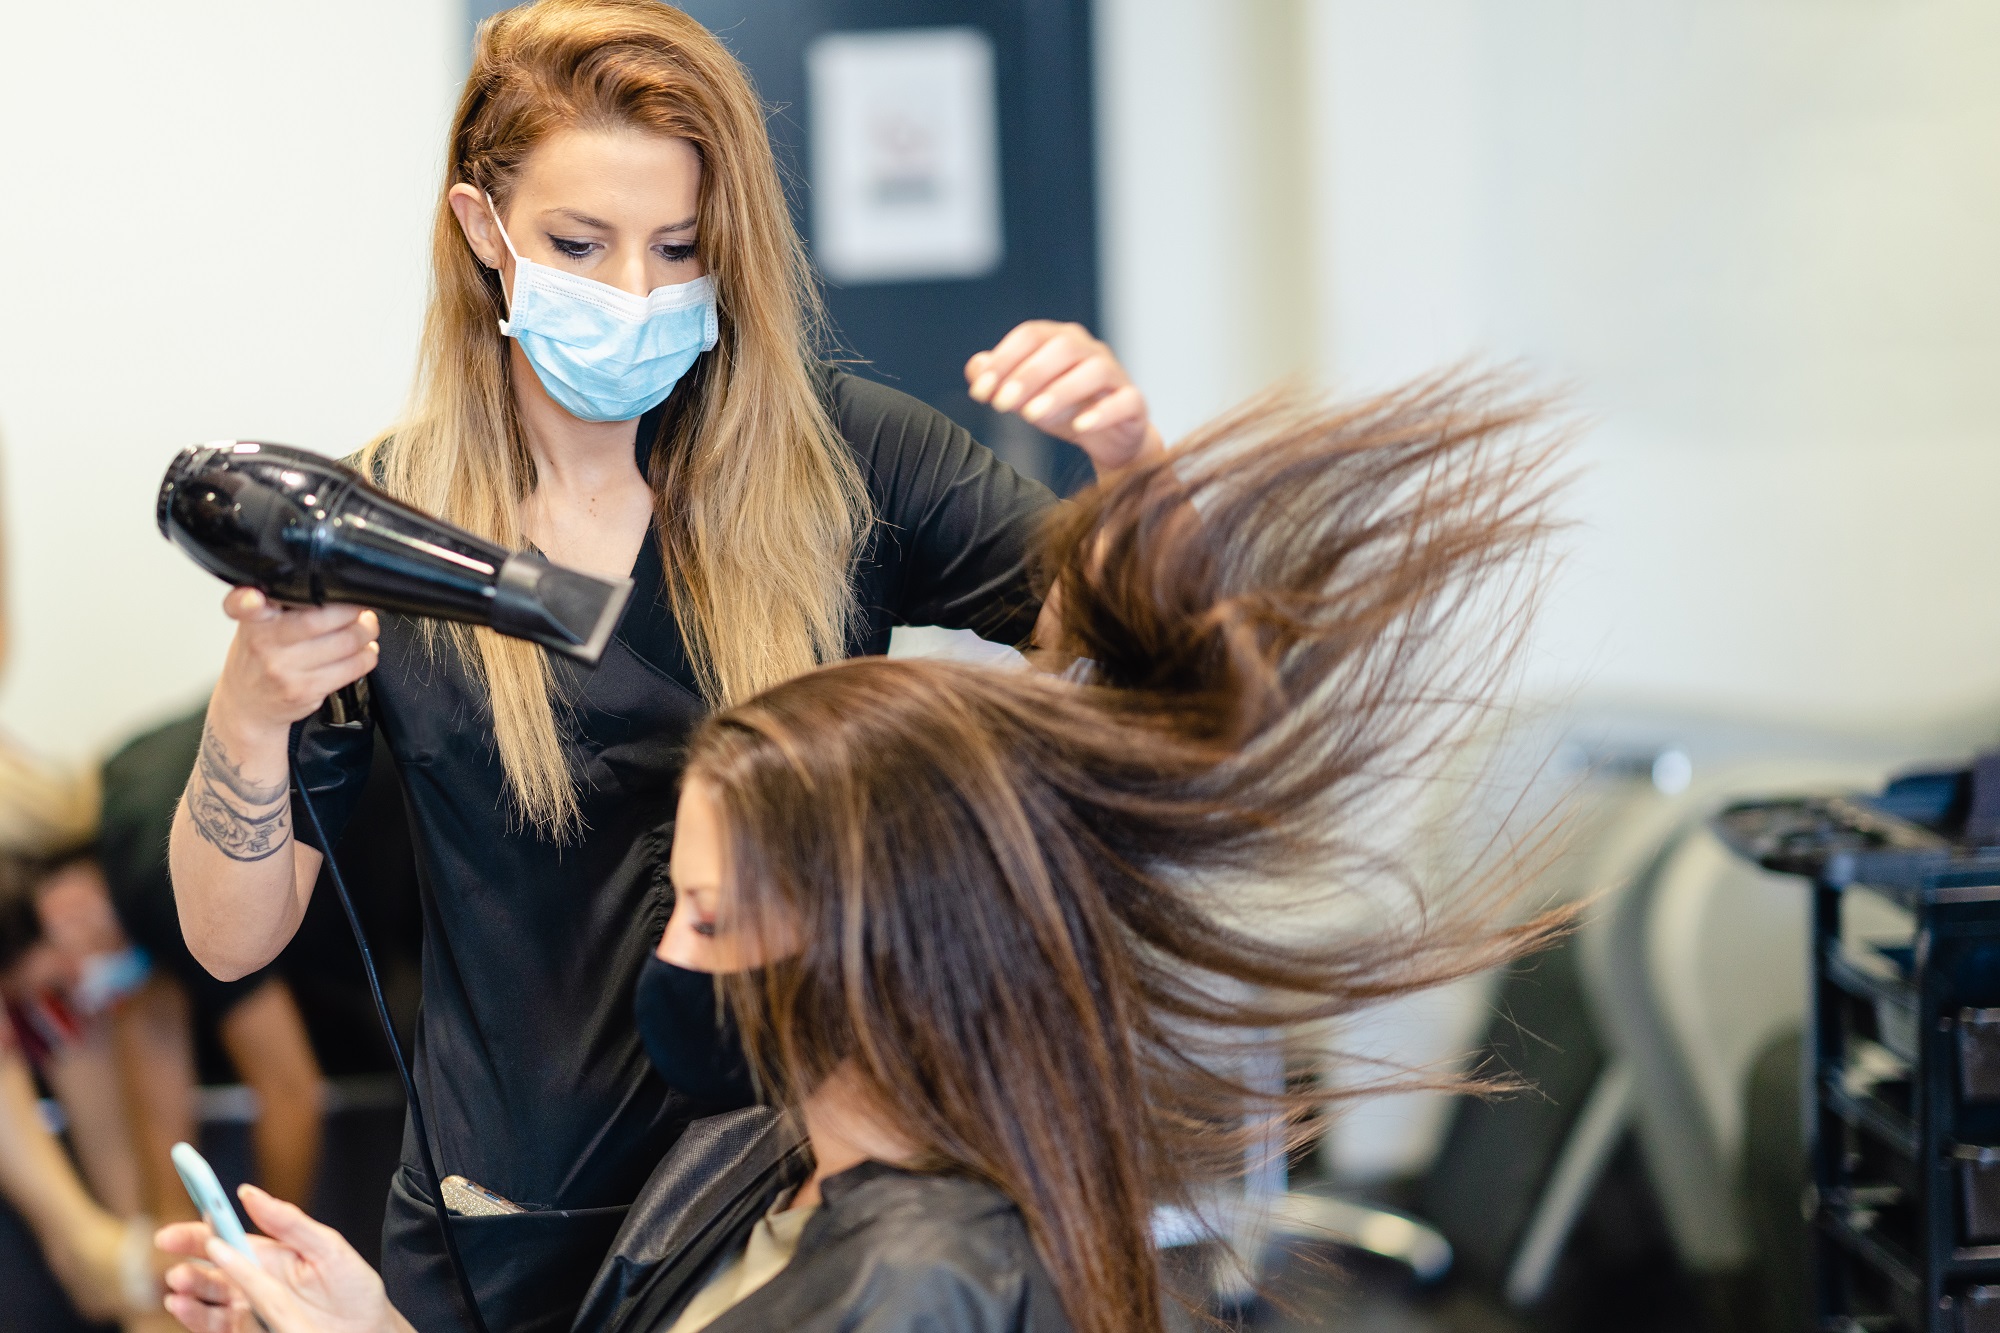 Female hairdresser drying her client's hair with a hairdryer, wearing protective masks 